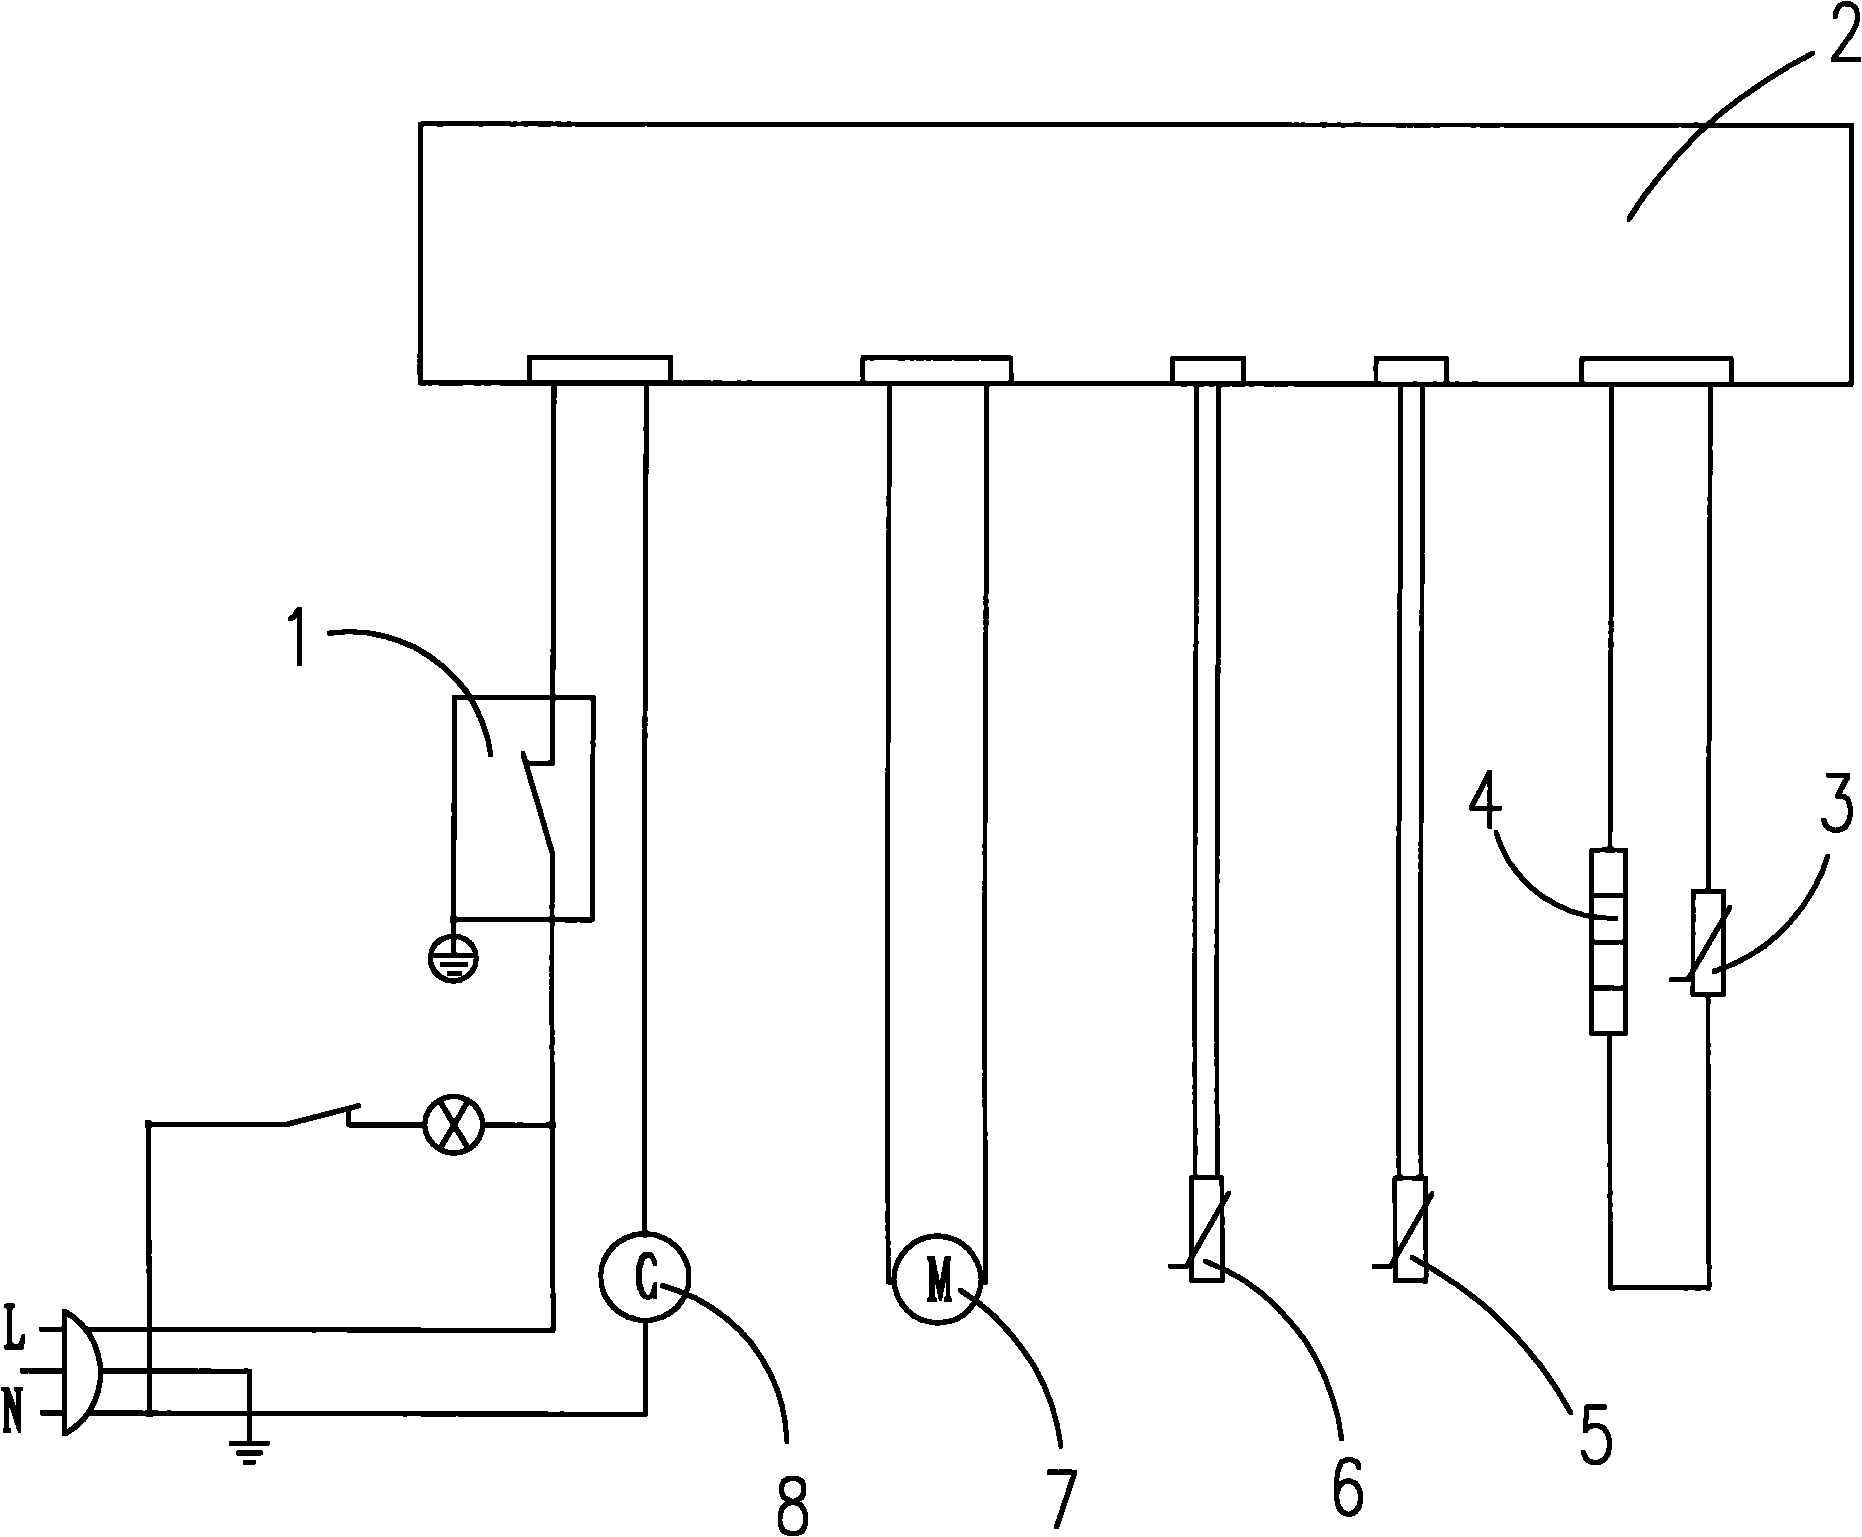 Electronic defrosting system having refrigerating chamber stopping function